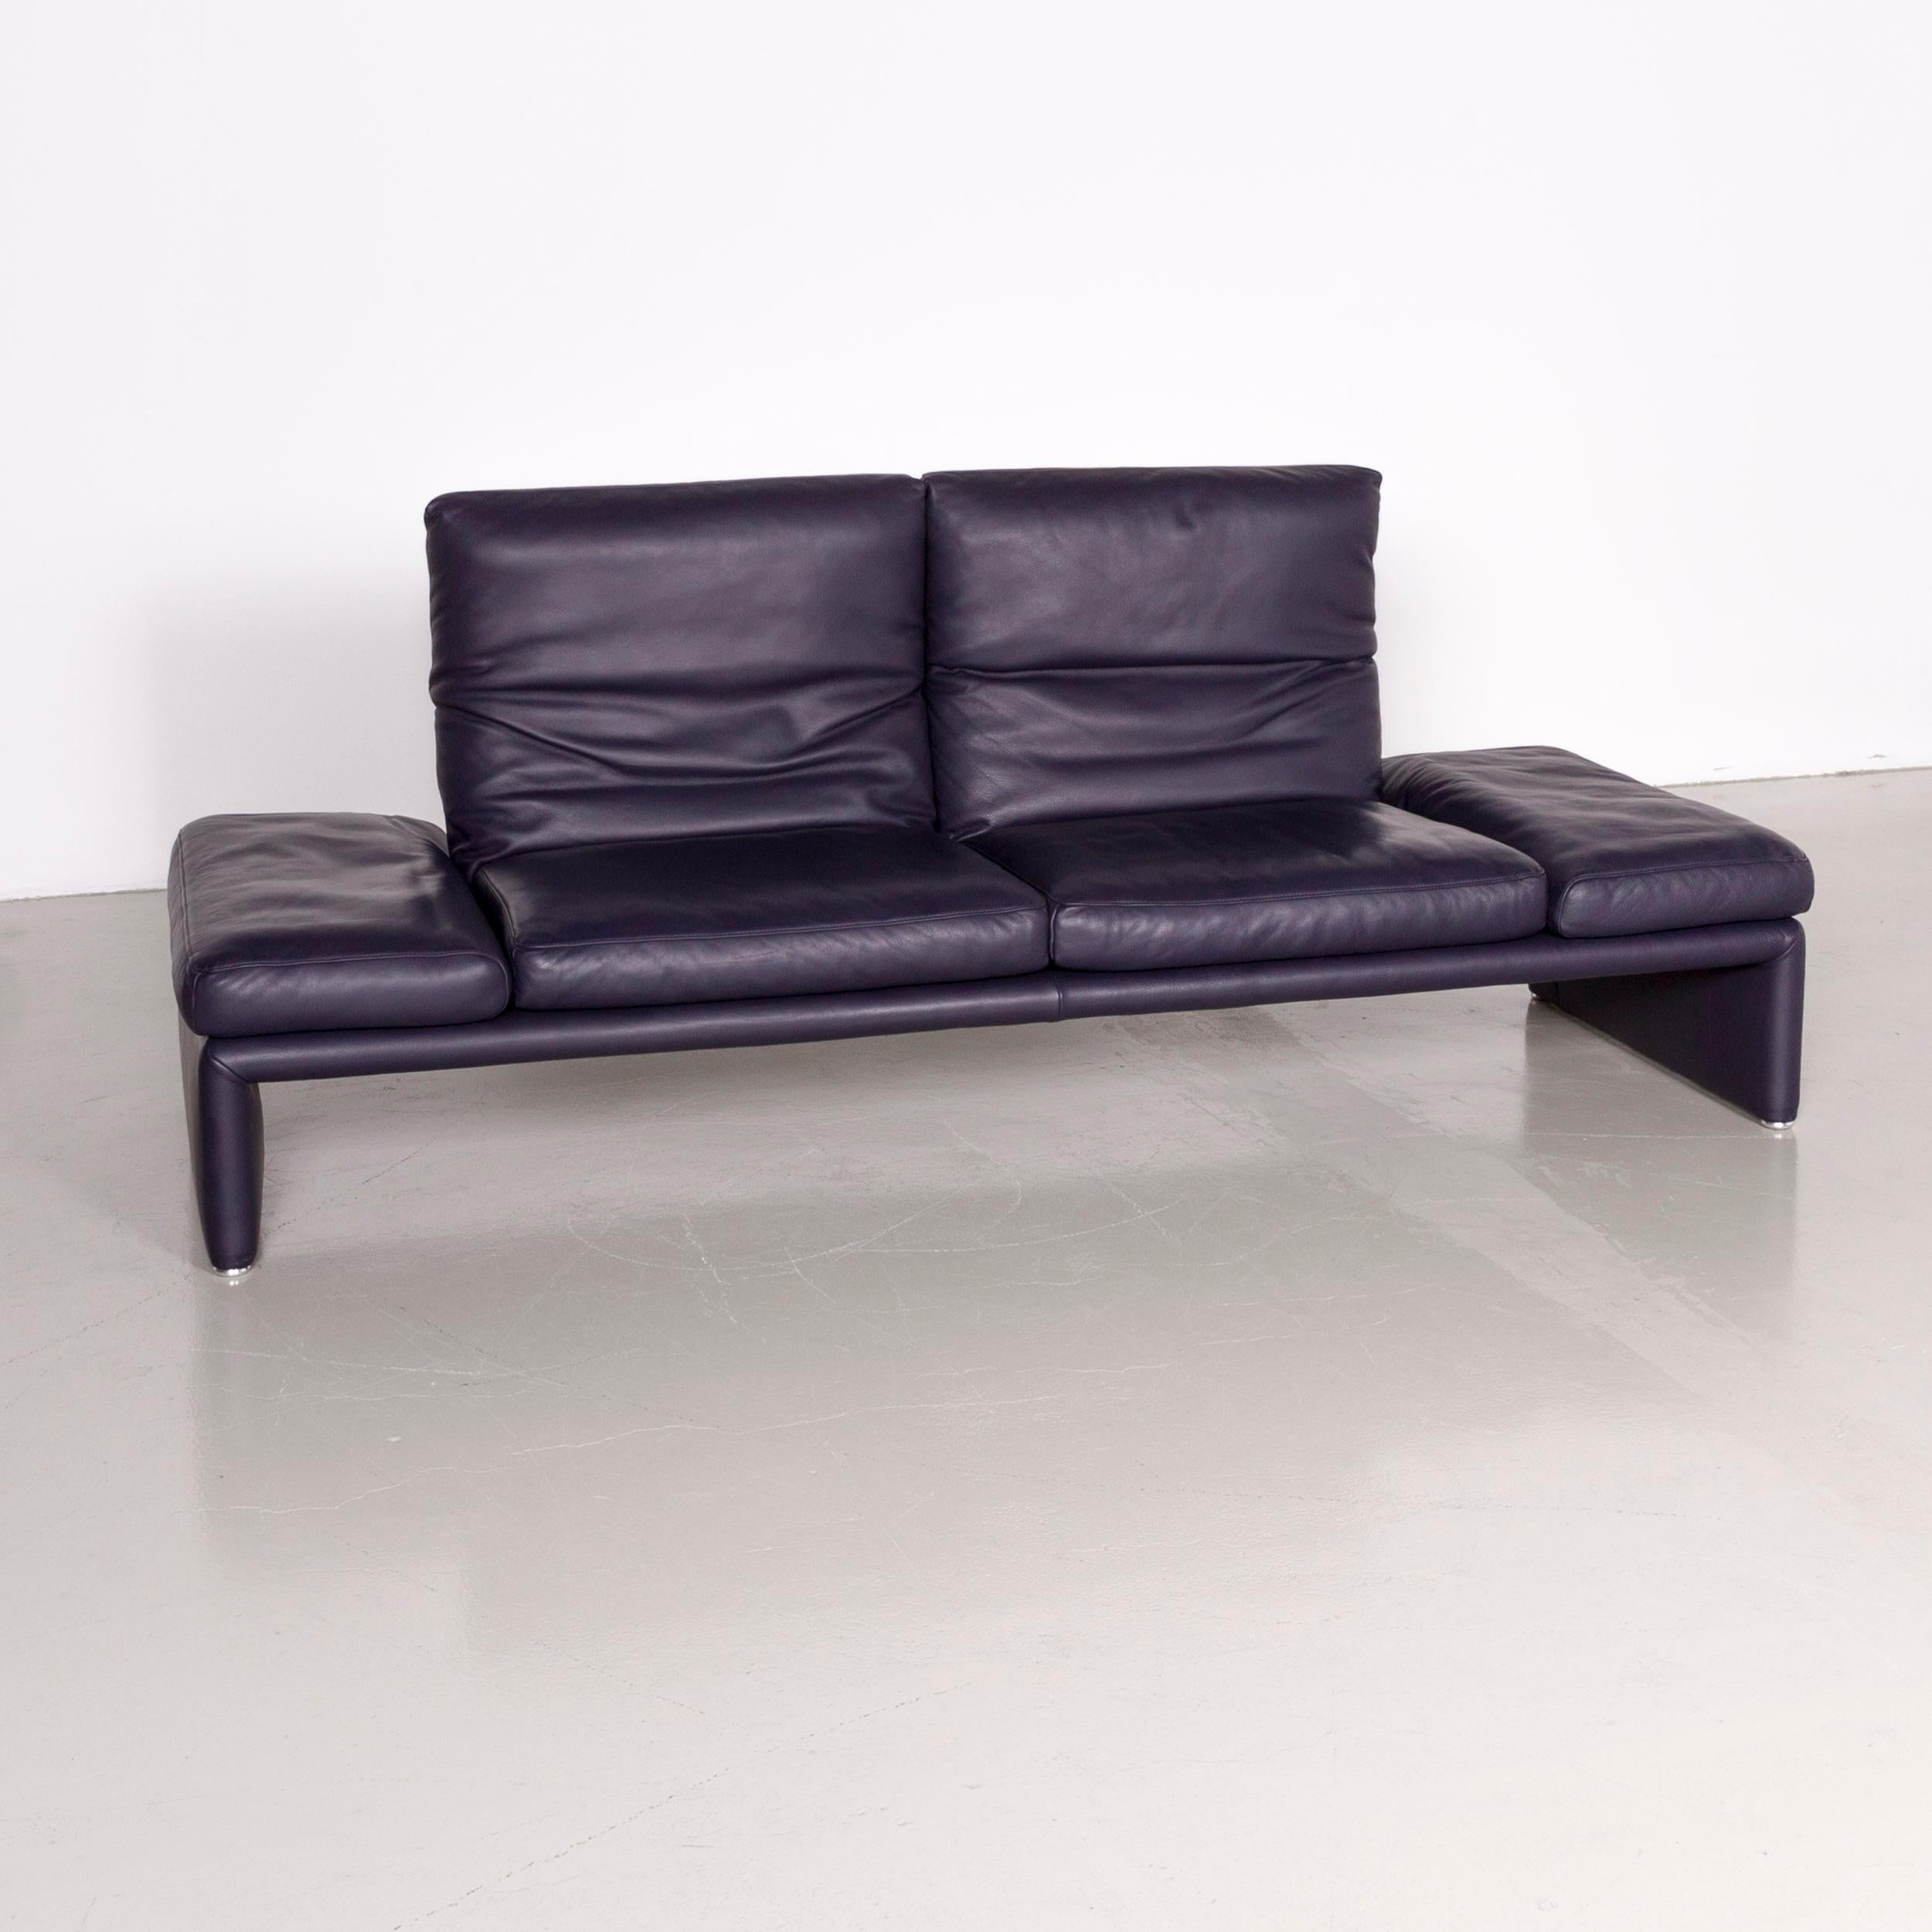 Koinor Raoul designer sofa purple leather three-seat couch.